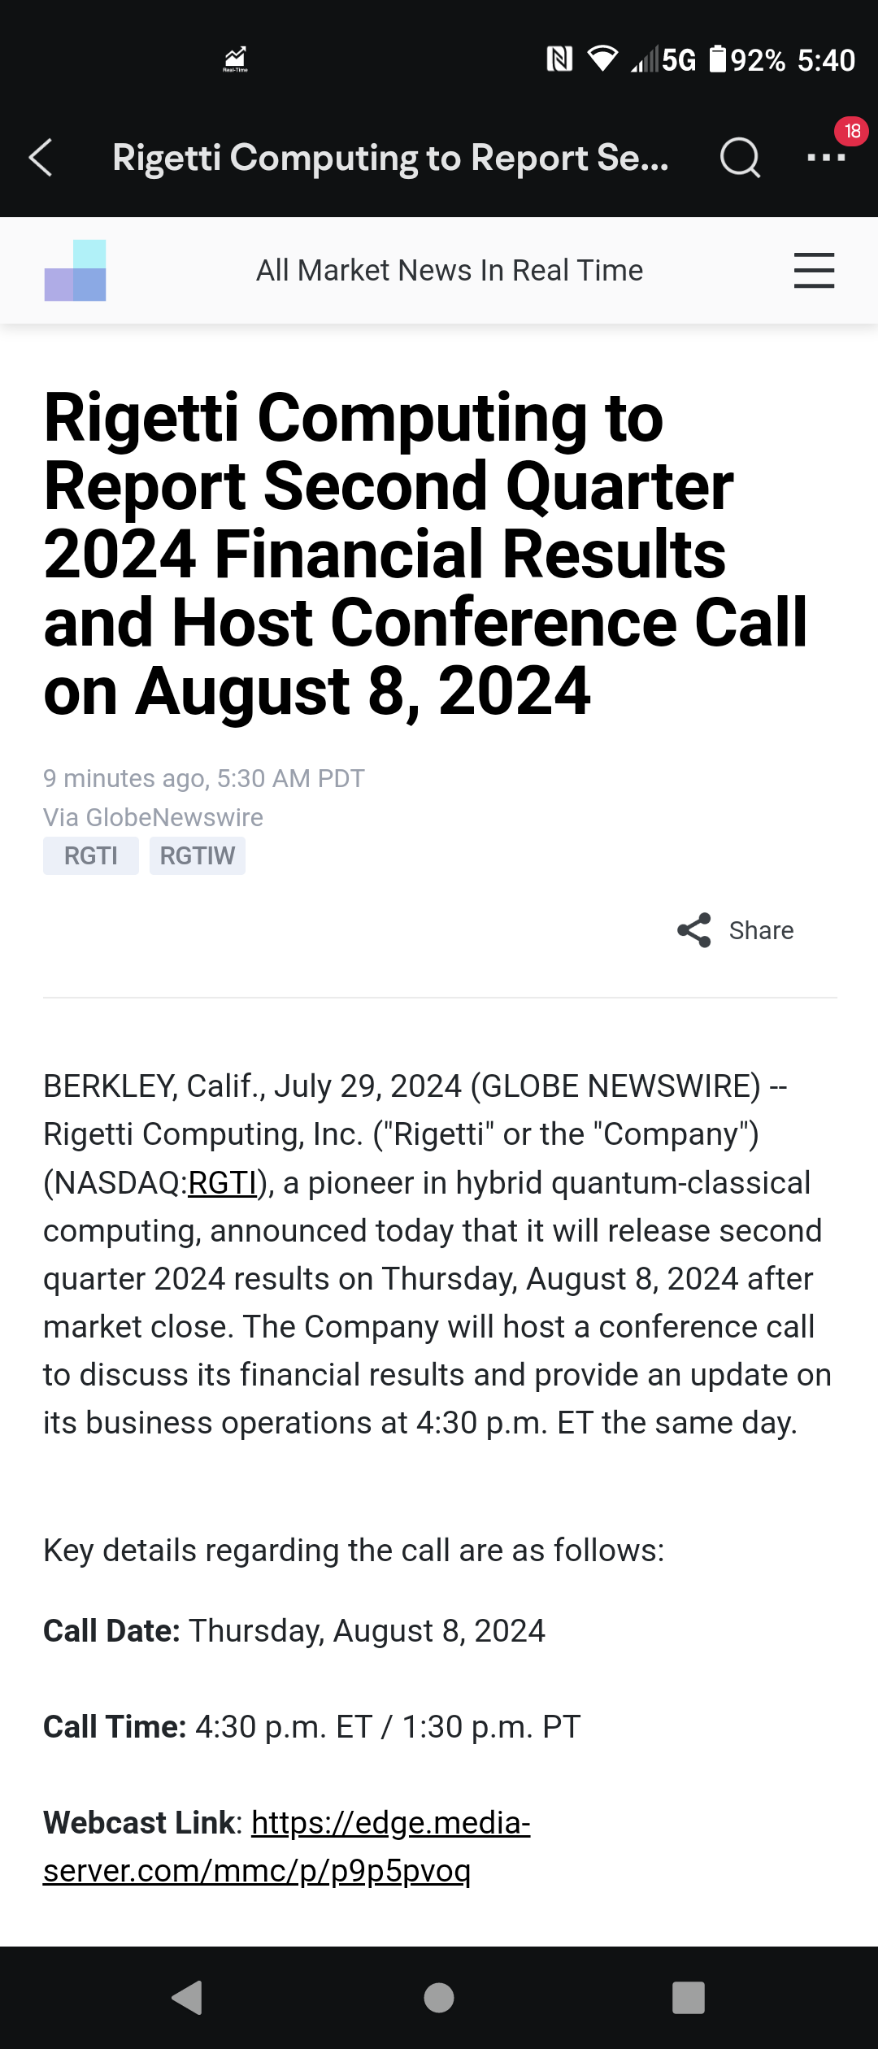 $Rigetti Computing (RGTI.US)$ Rigetti Computing to Report Second Quarter 2024 Financial Results and Host Conference Call on August 8, 2024